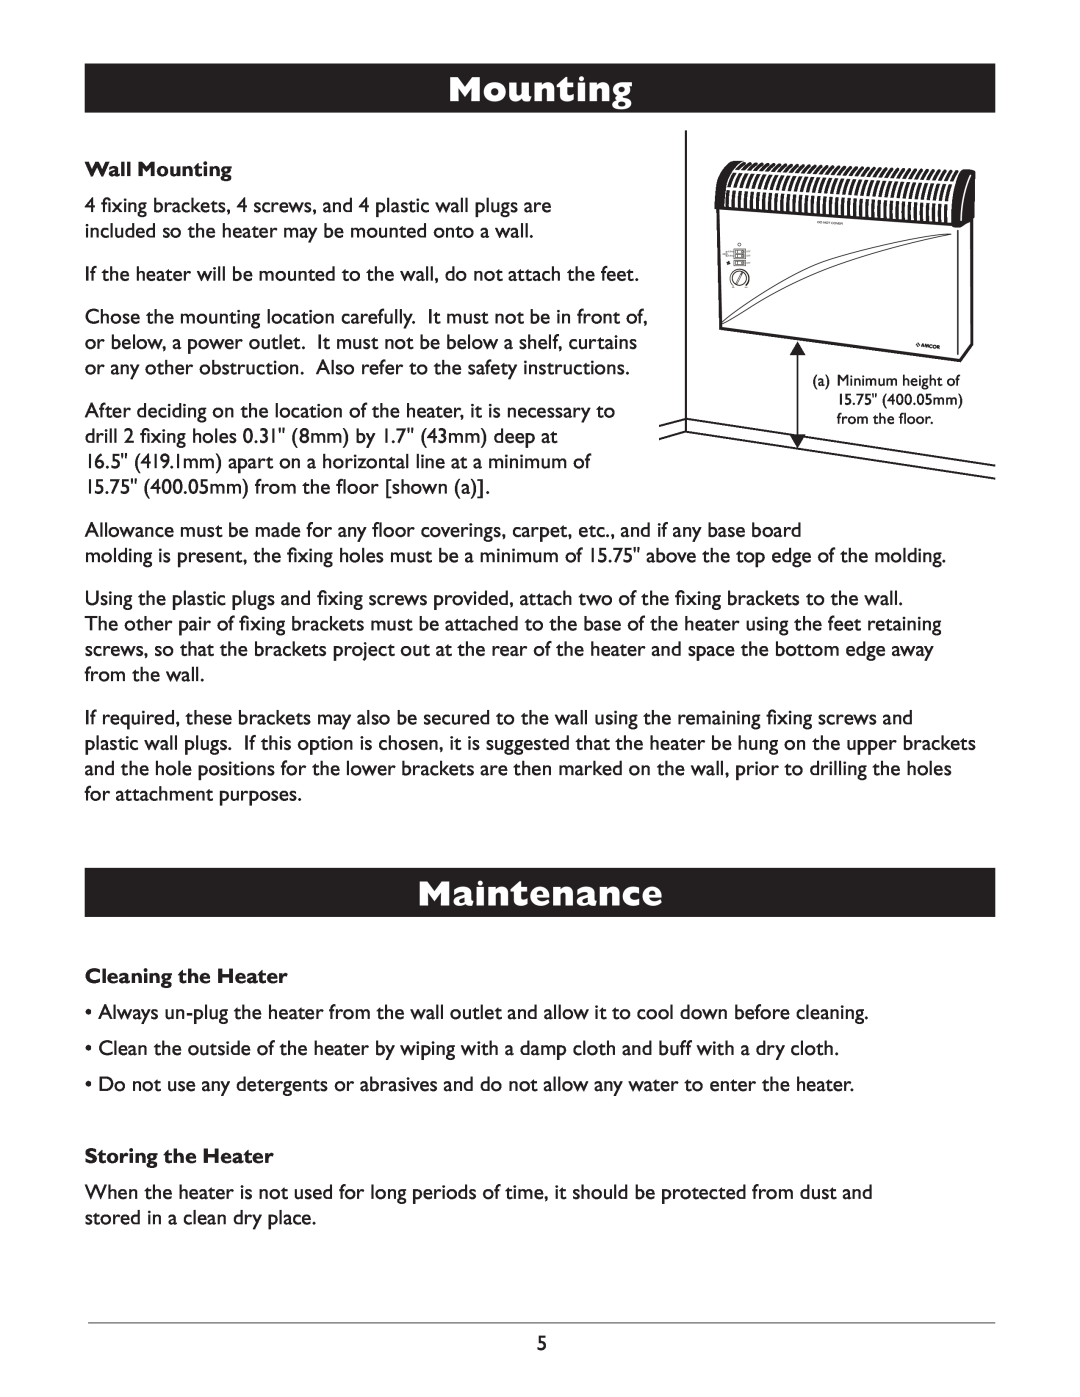 Amcor AMH9 owner manual Maintenance, Wall Mounting, Cleaning the Heater, Storing the Heater 